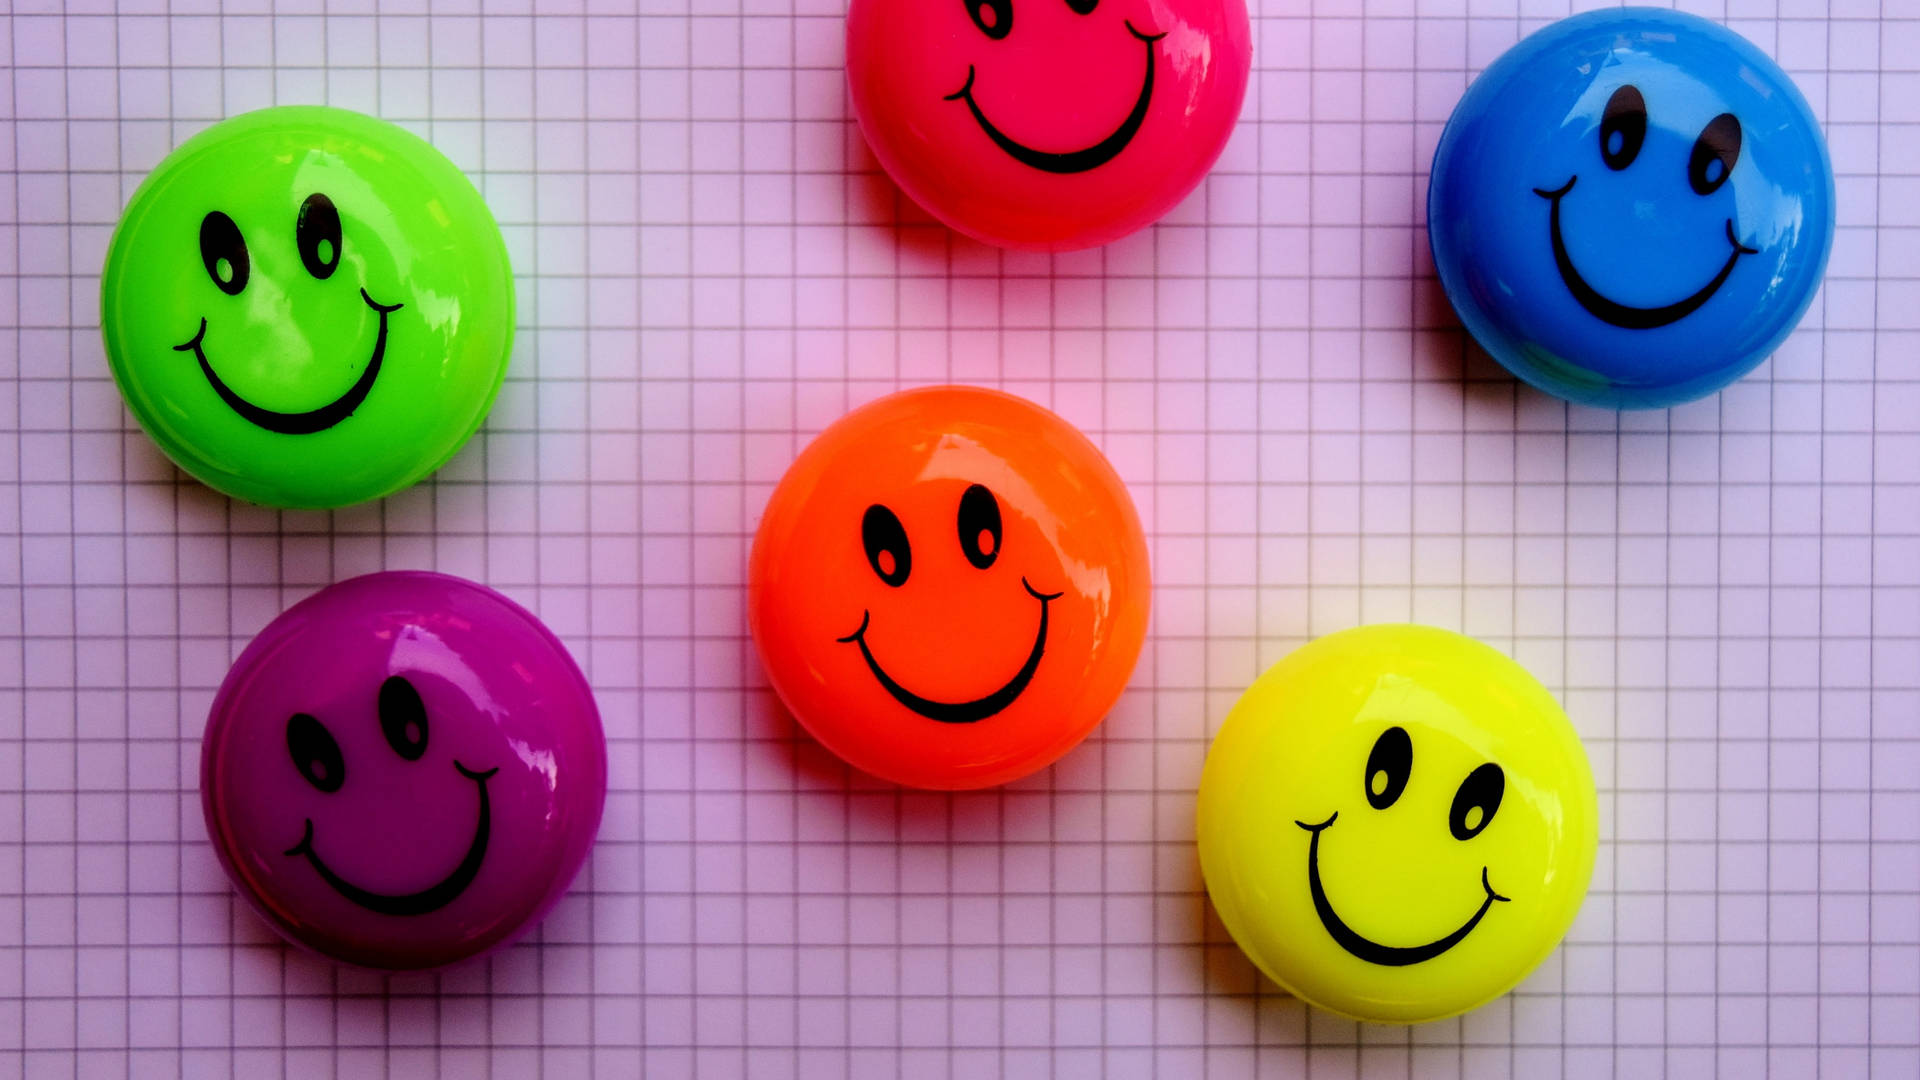 Download Colorful Cute Smile Decoration Wallpaper | Wallpapers.com